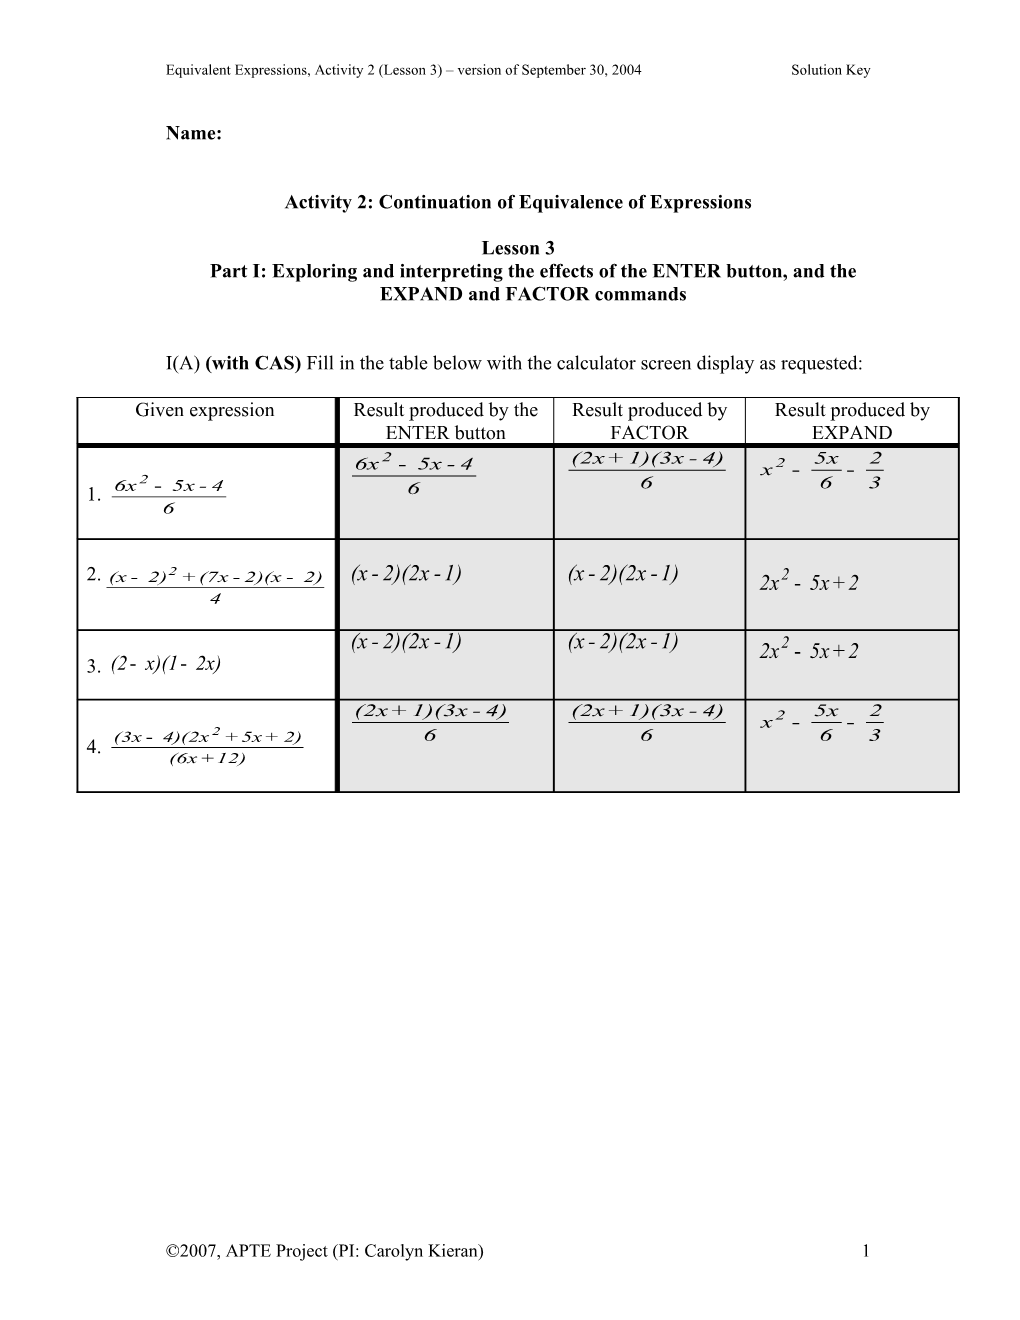 Activity 2: Continuation of Equivalence of Expressions